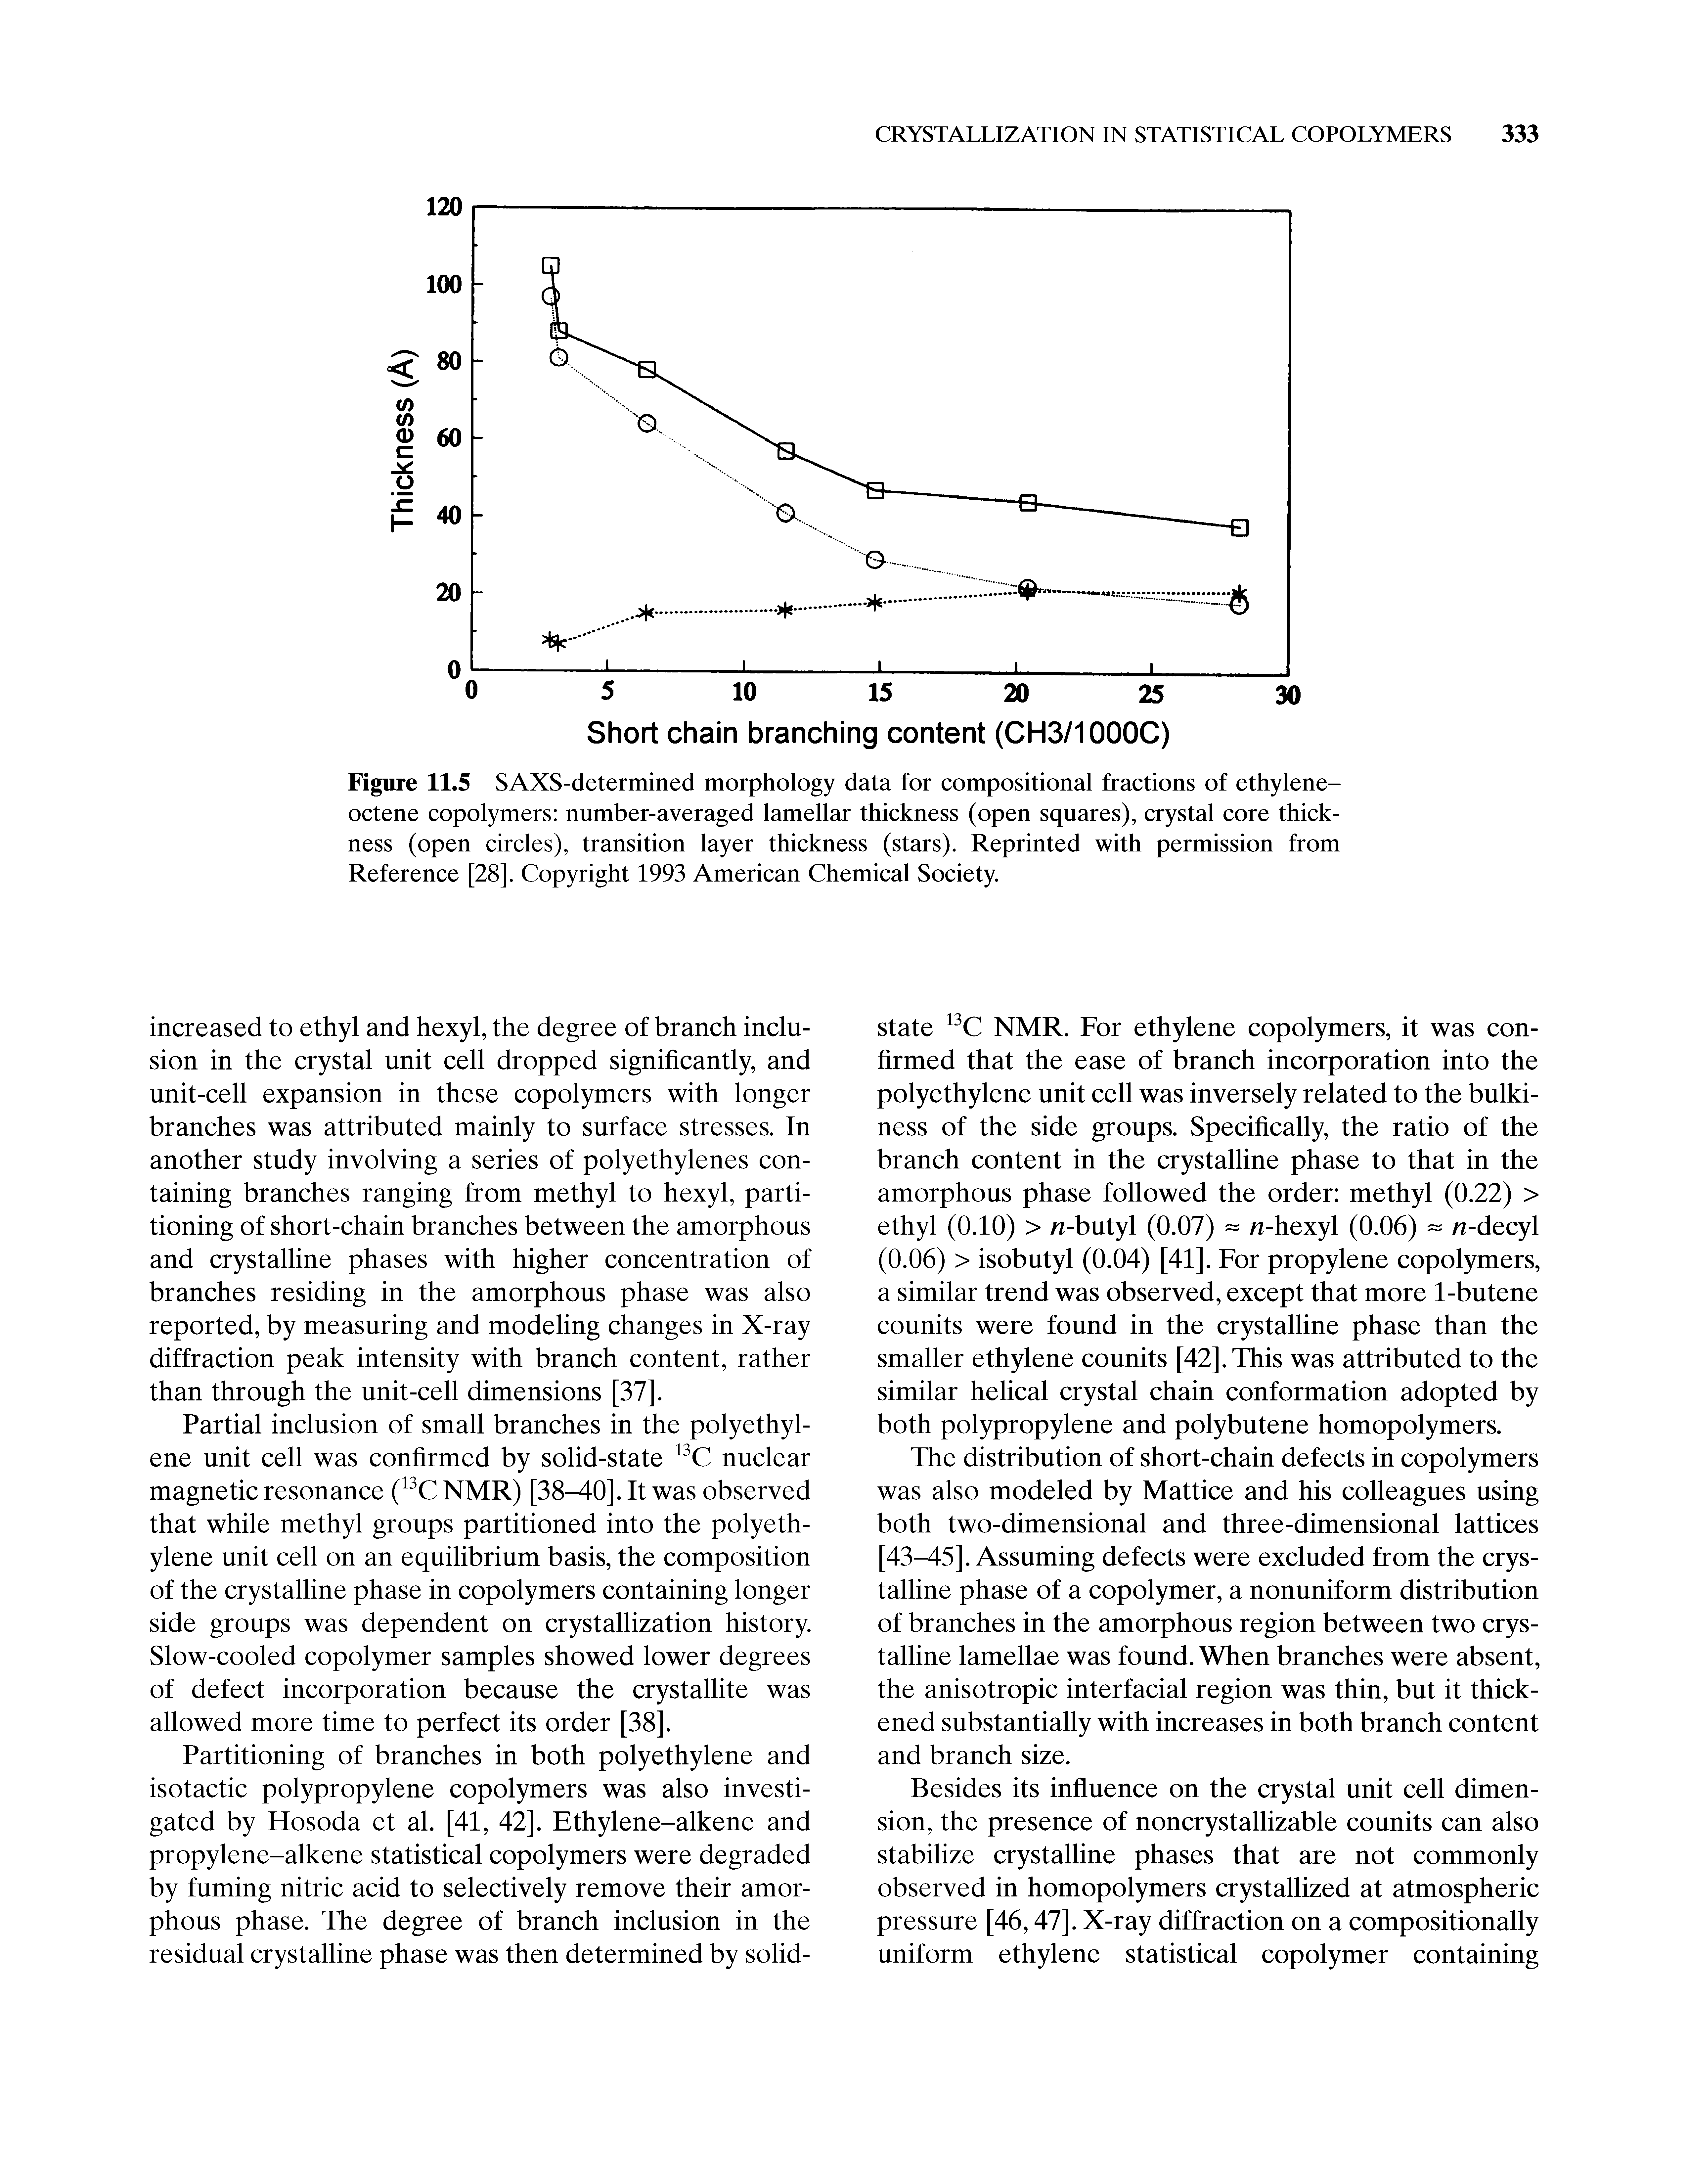 Figure 11.5 SAXS-determined morphology data for compositional fractions of ethylene-octene copolymers number-averaged lamellar thickness (open squares), crystal core thickness (open circles), transition layer thickness (stars). Reprinted with permission from Reference [28]. Copyright 1993 American Chemical Society.